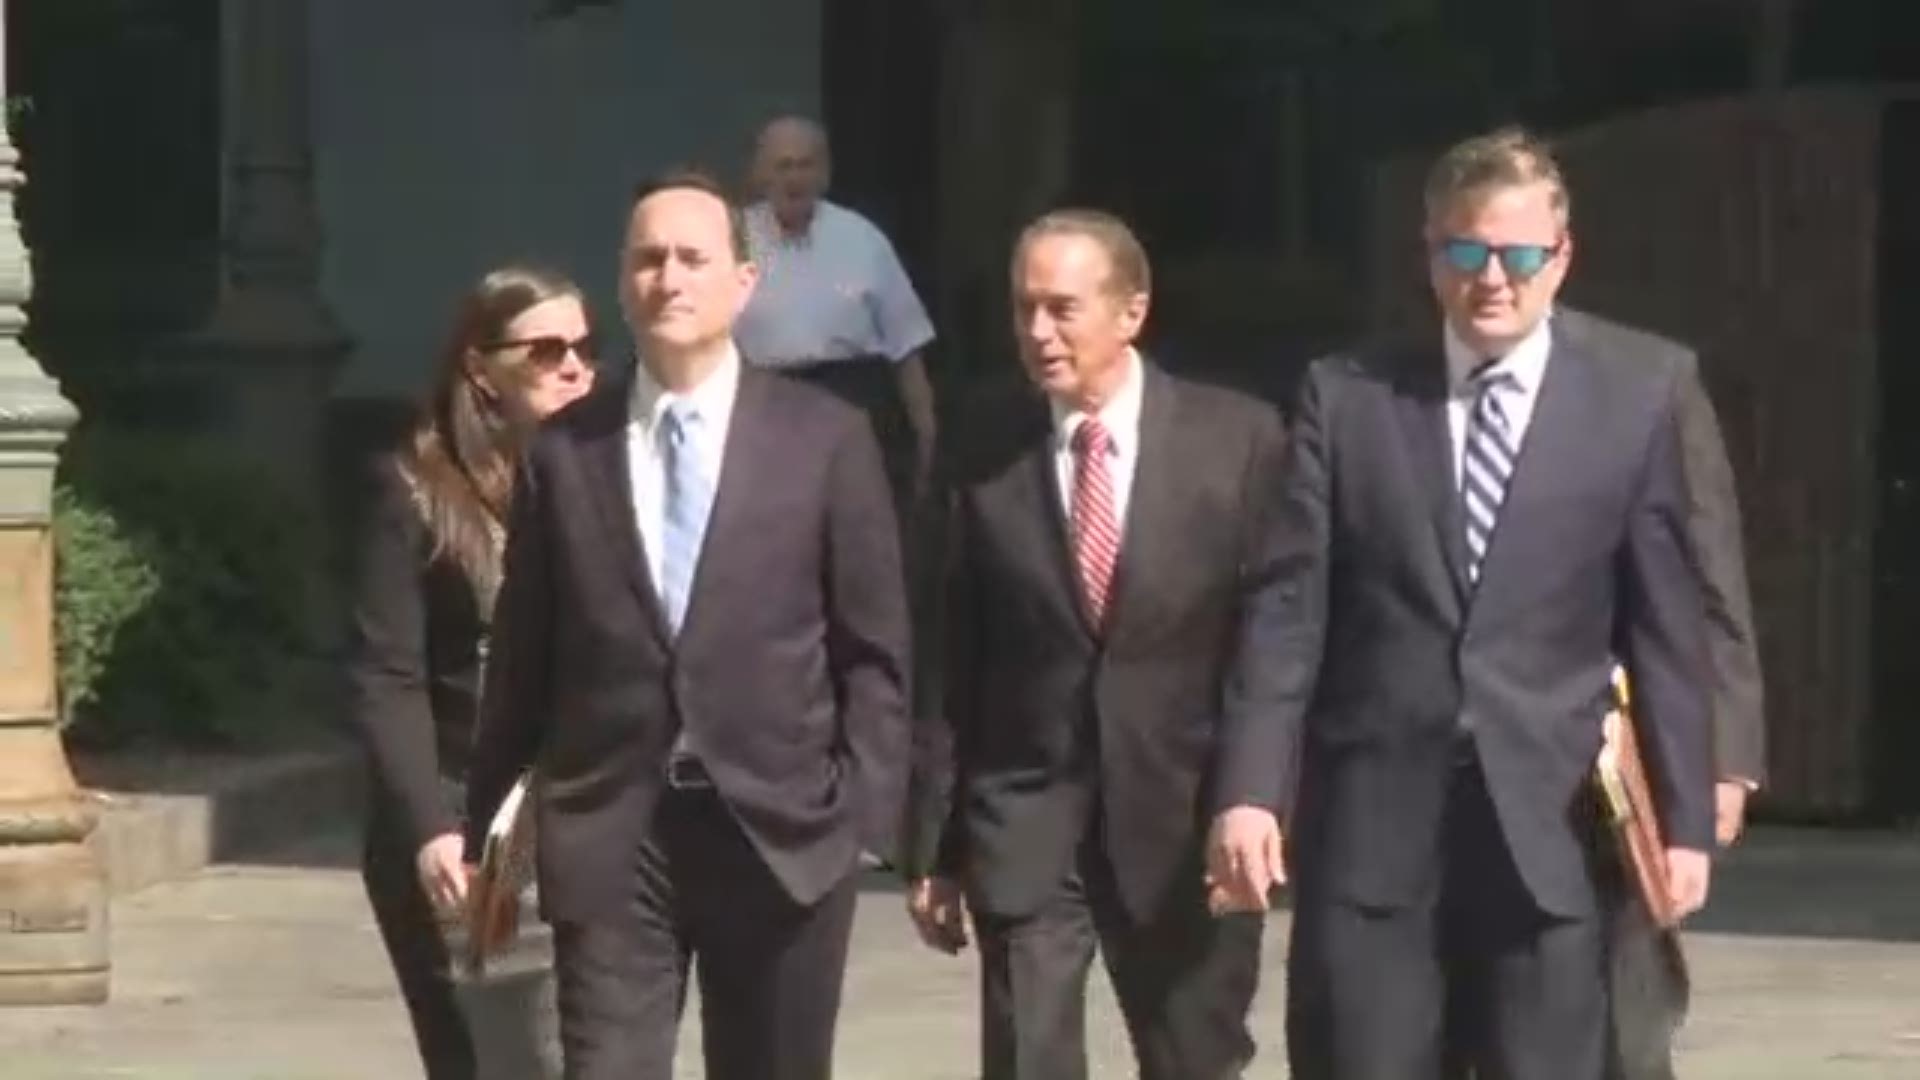 Chris Collins arrives at court.  He is expected to change his plea in connection with insider trading charges.